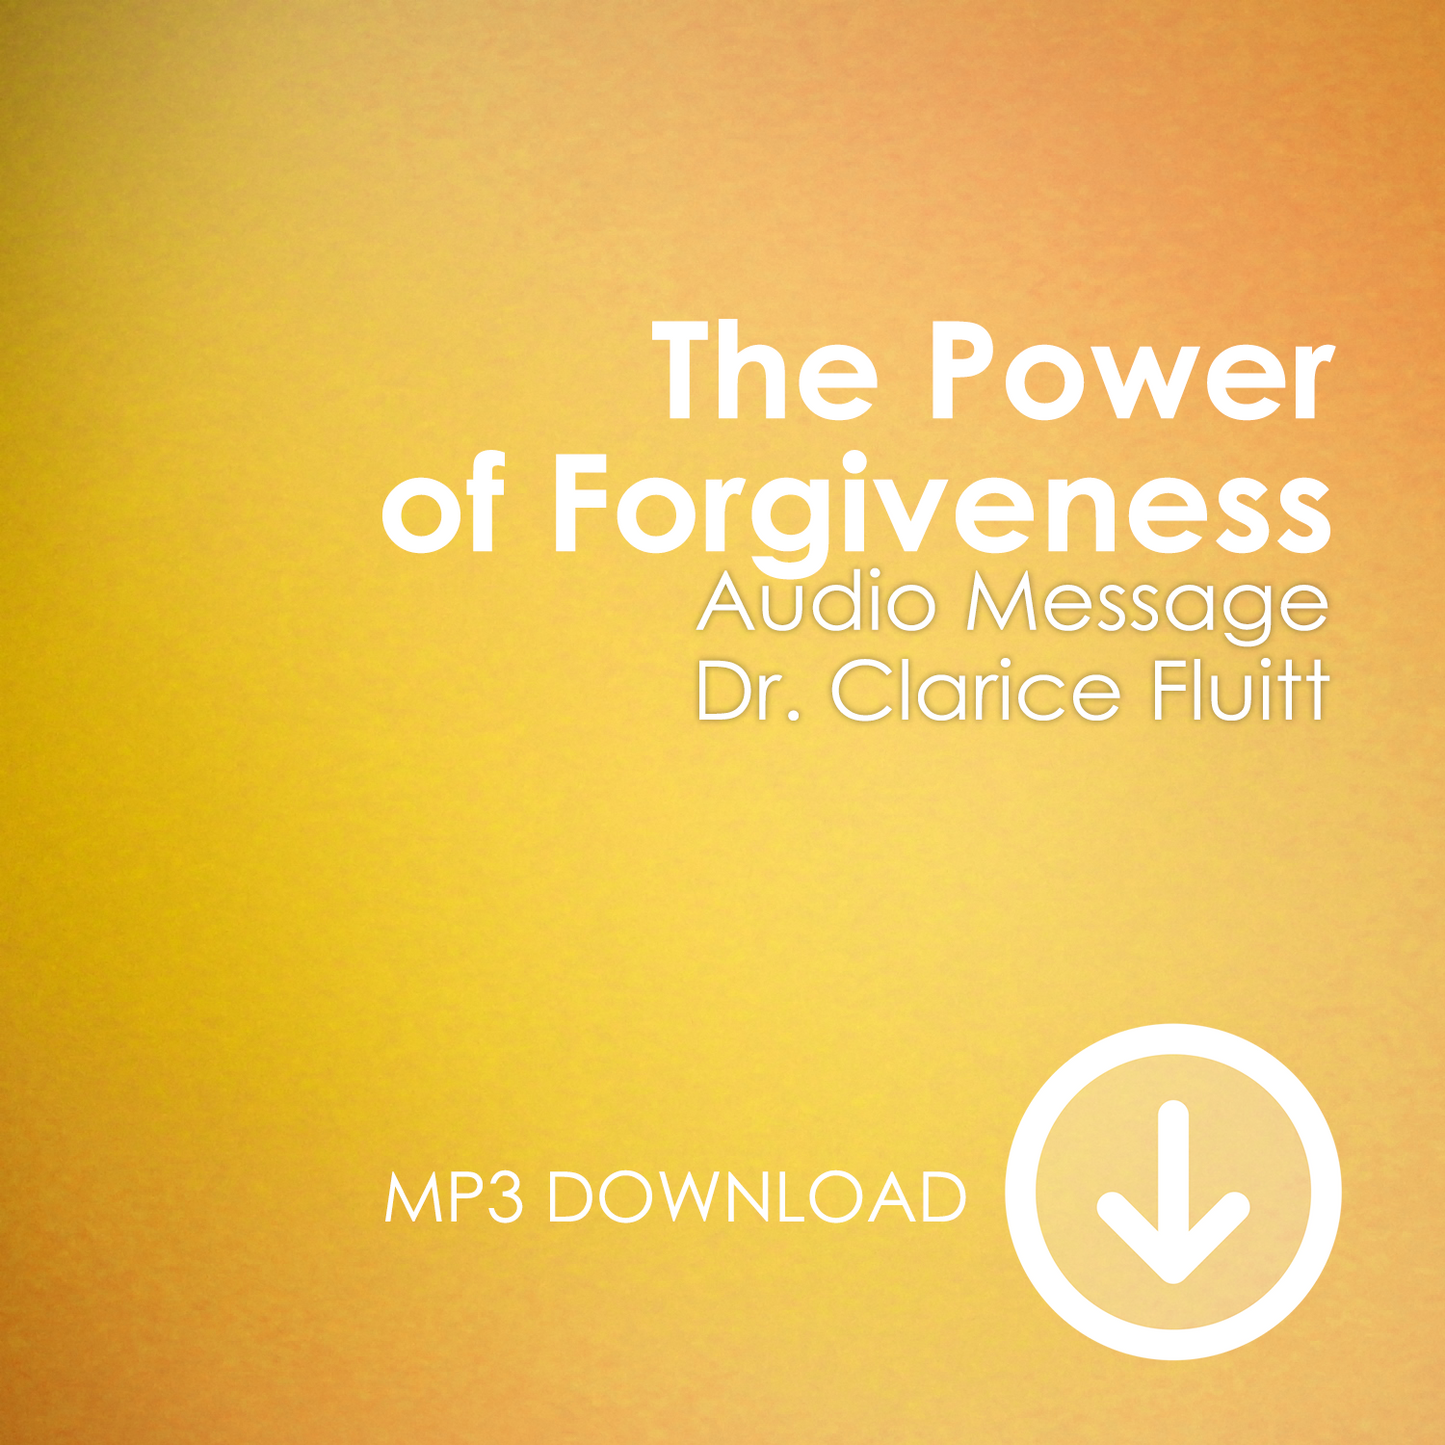 The Power of Forgiveness MP3